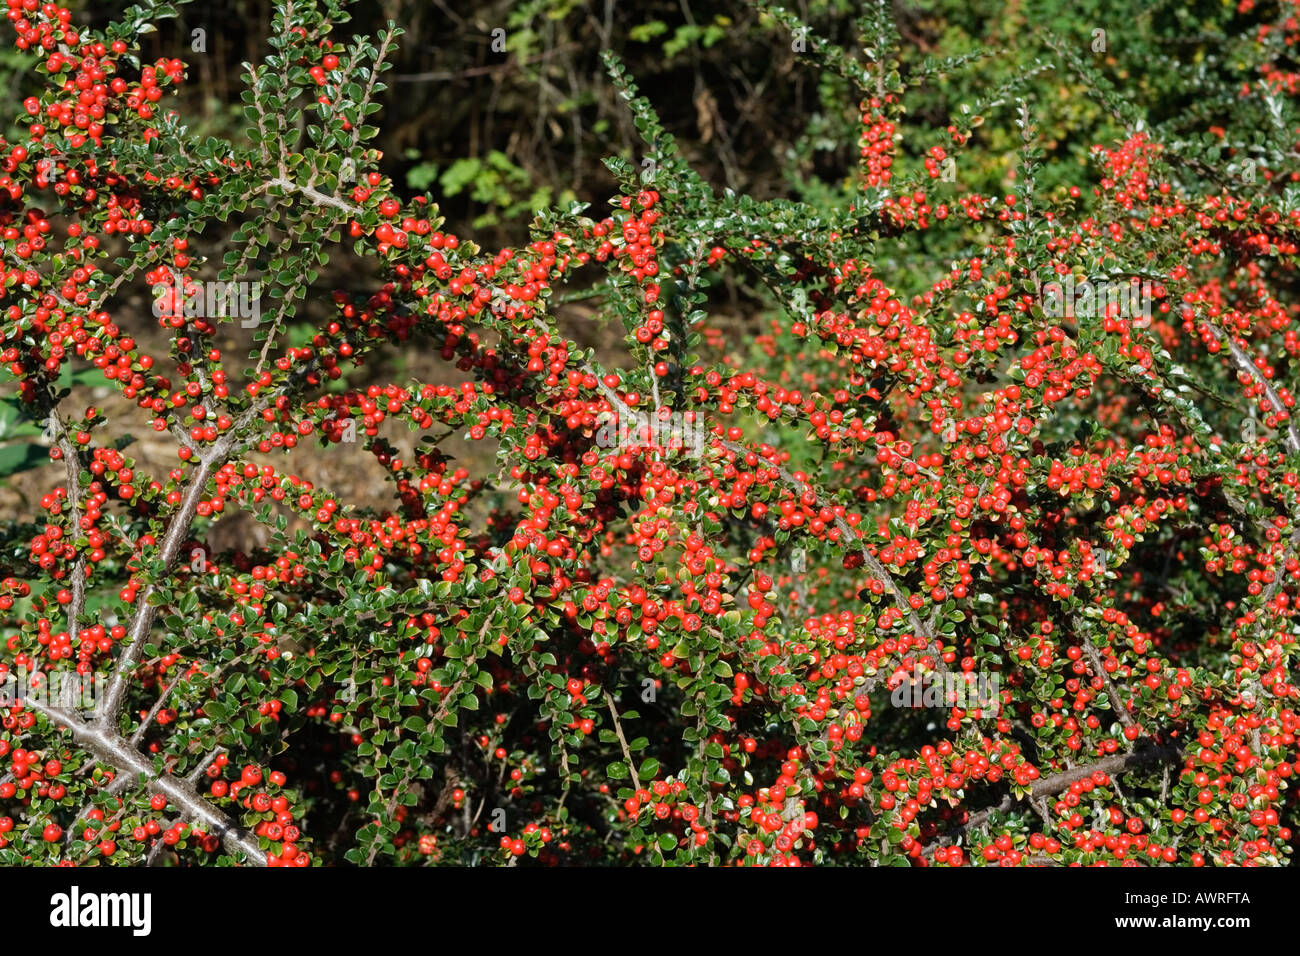 Cotoneaster shrub with red berries in autumn/fall, Surrey, UK ( (cotoneaster decorus)) Stock Photo